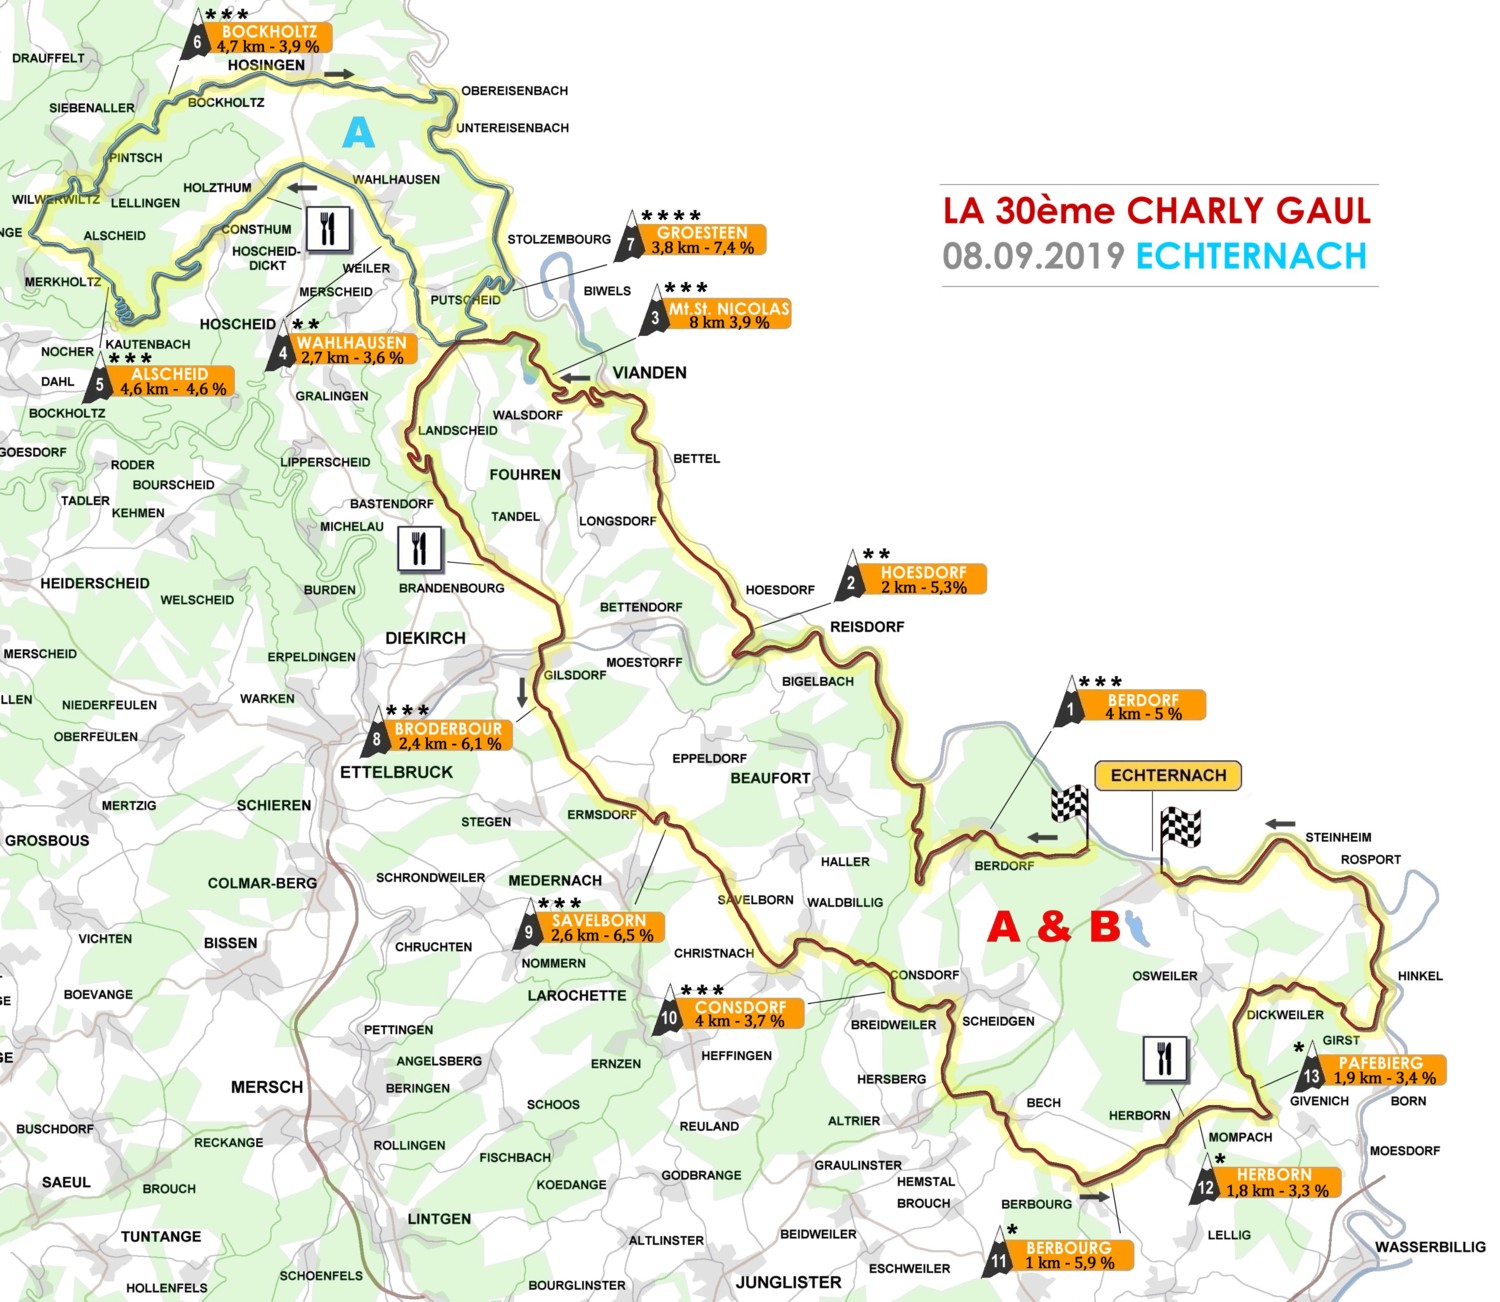 Course of La Charly Gaul 2019